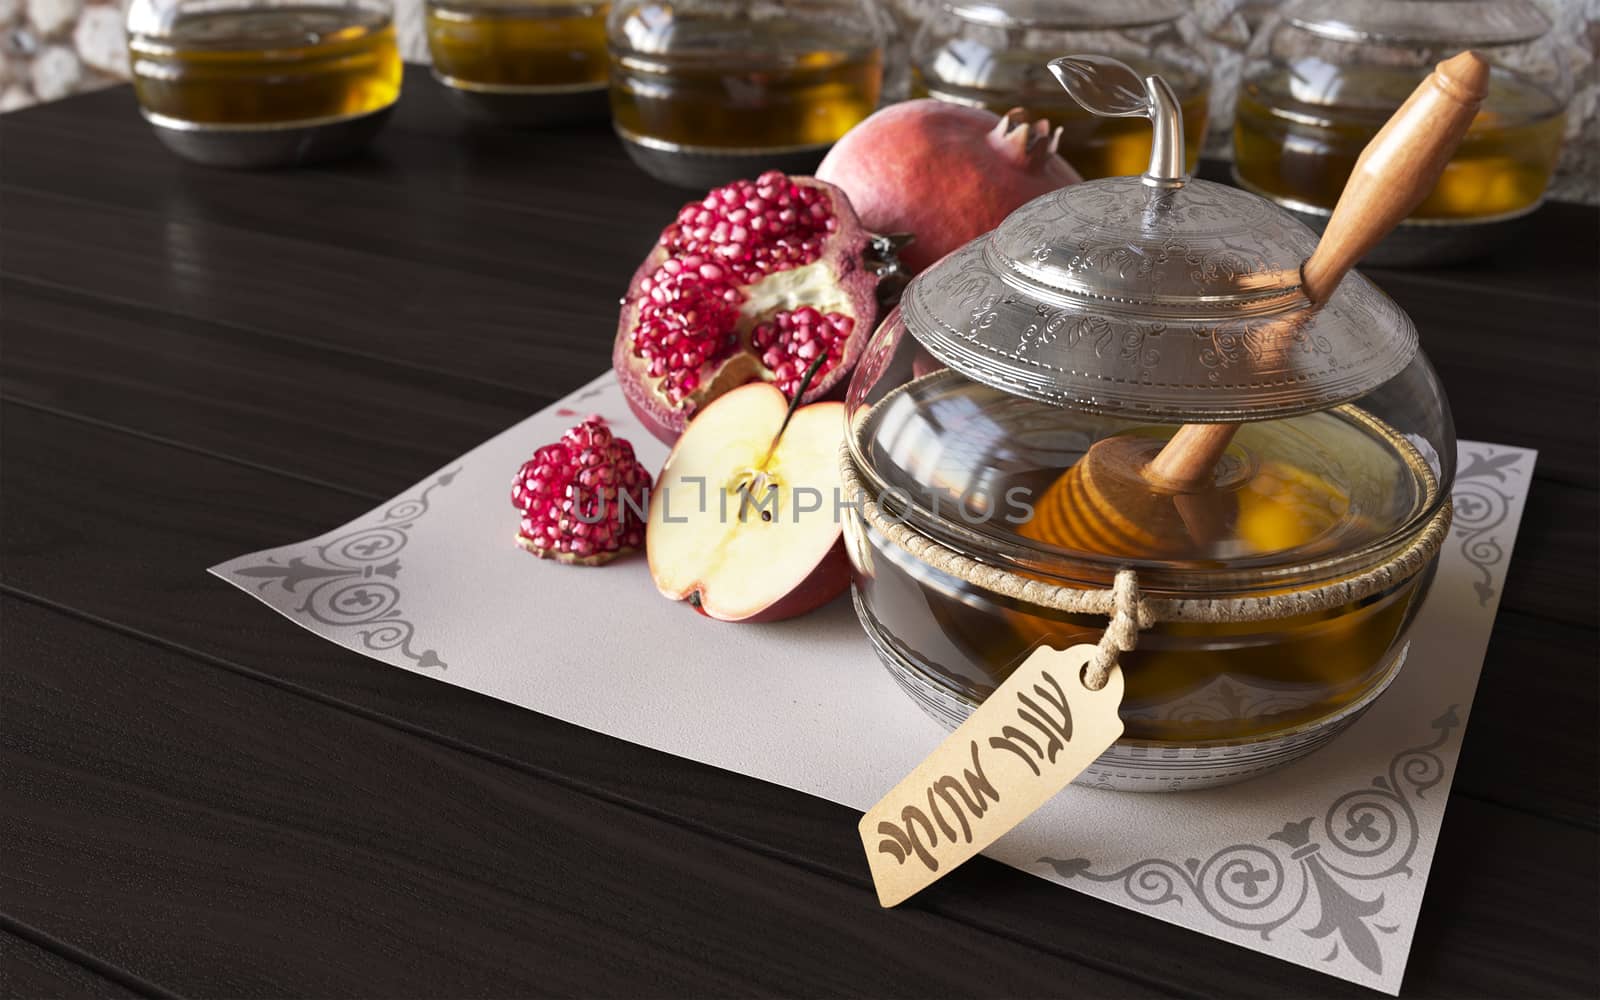 Honey jar with apples and pomegranate for Jewish New Year Holiday by denisgo